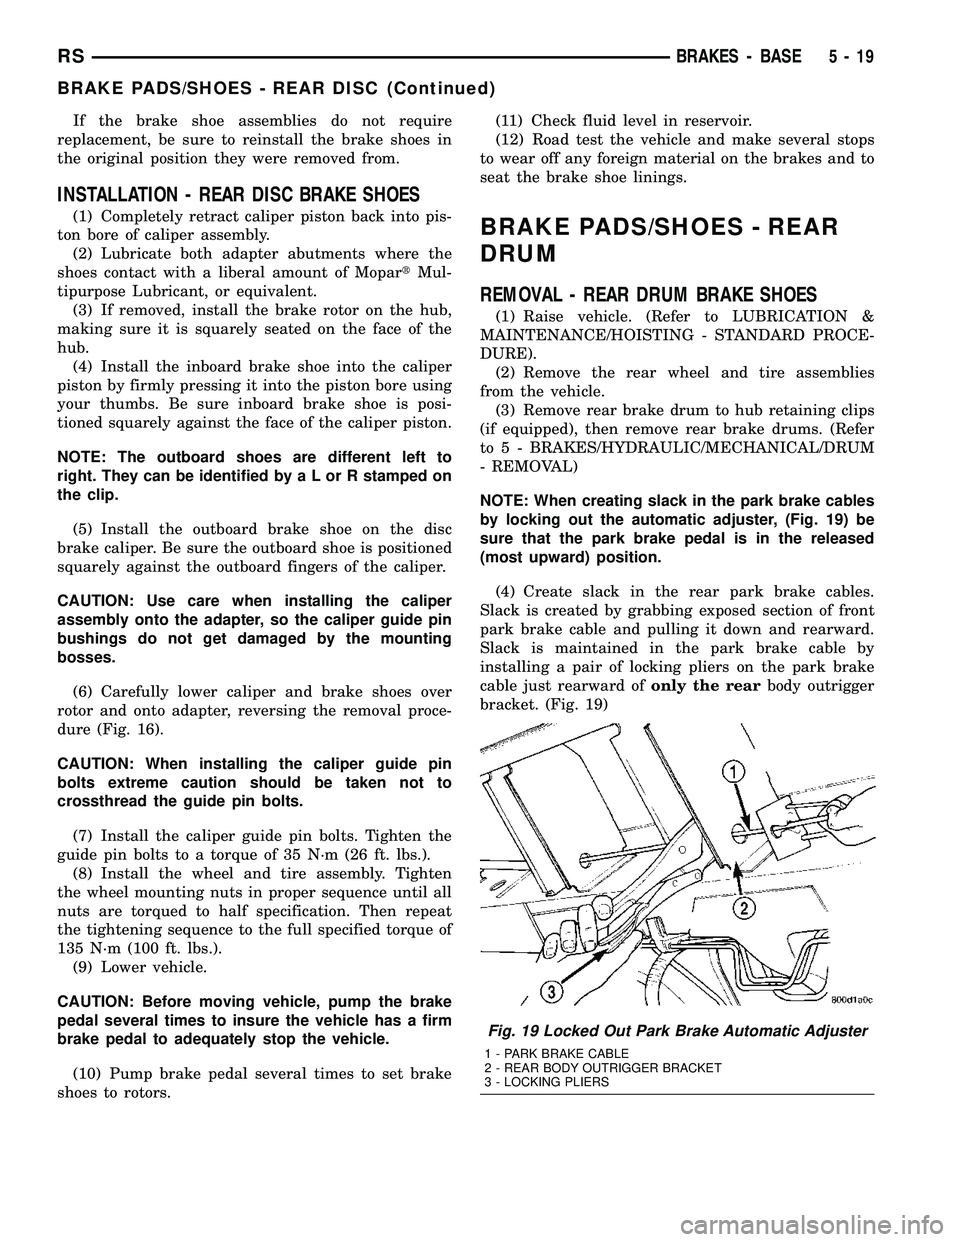 DODGE TOWN AND COUNTRY 2004  Service Manual If the brake shoe assemblies do not require
replacement, be sure to reinstall the brake shoes in
the original position they were removed from.
INSTALLATION - REAR DISC BRAKE SHOES
(1) Completely retra